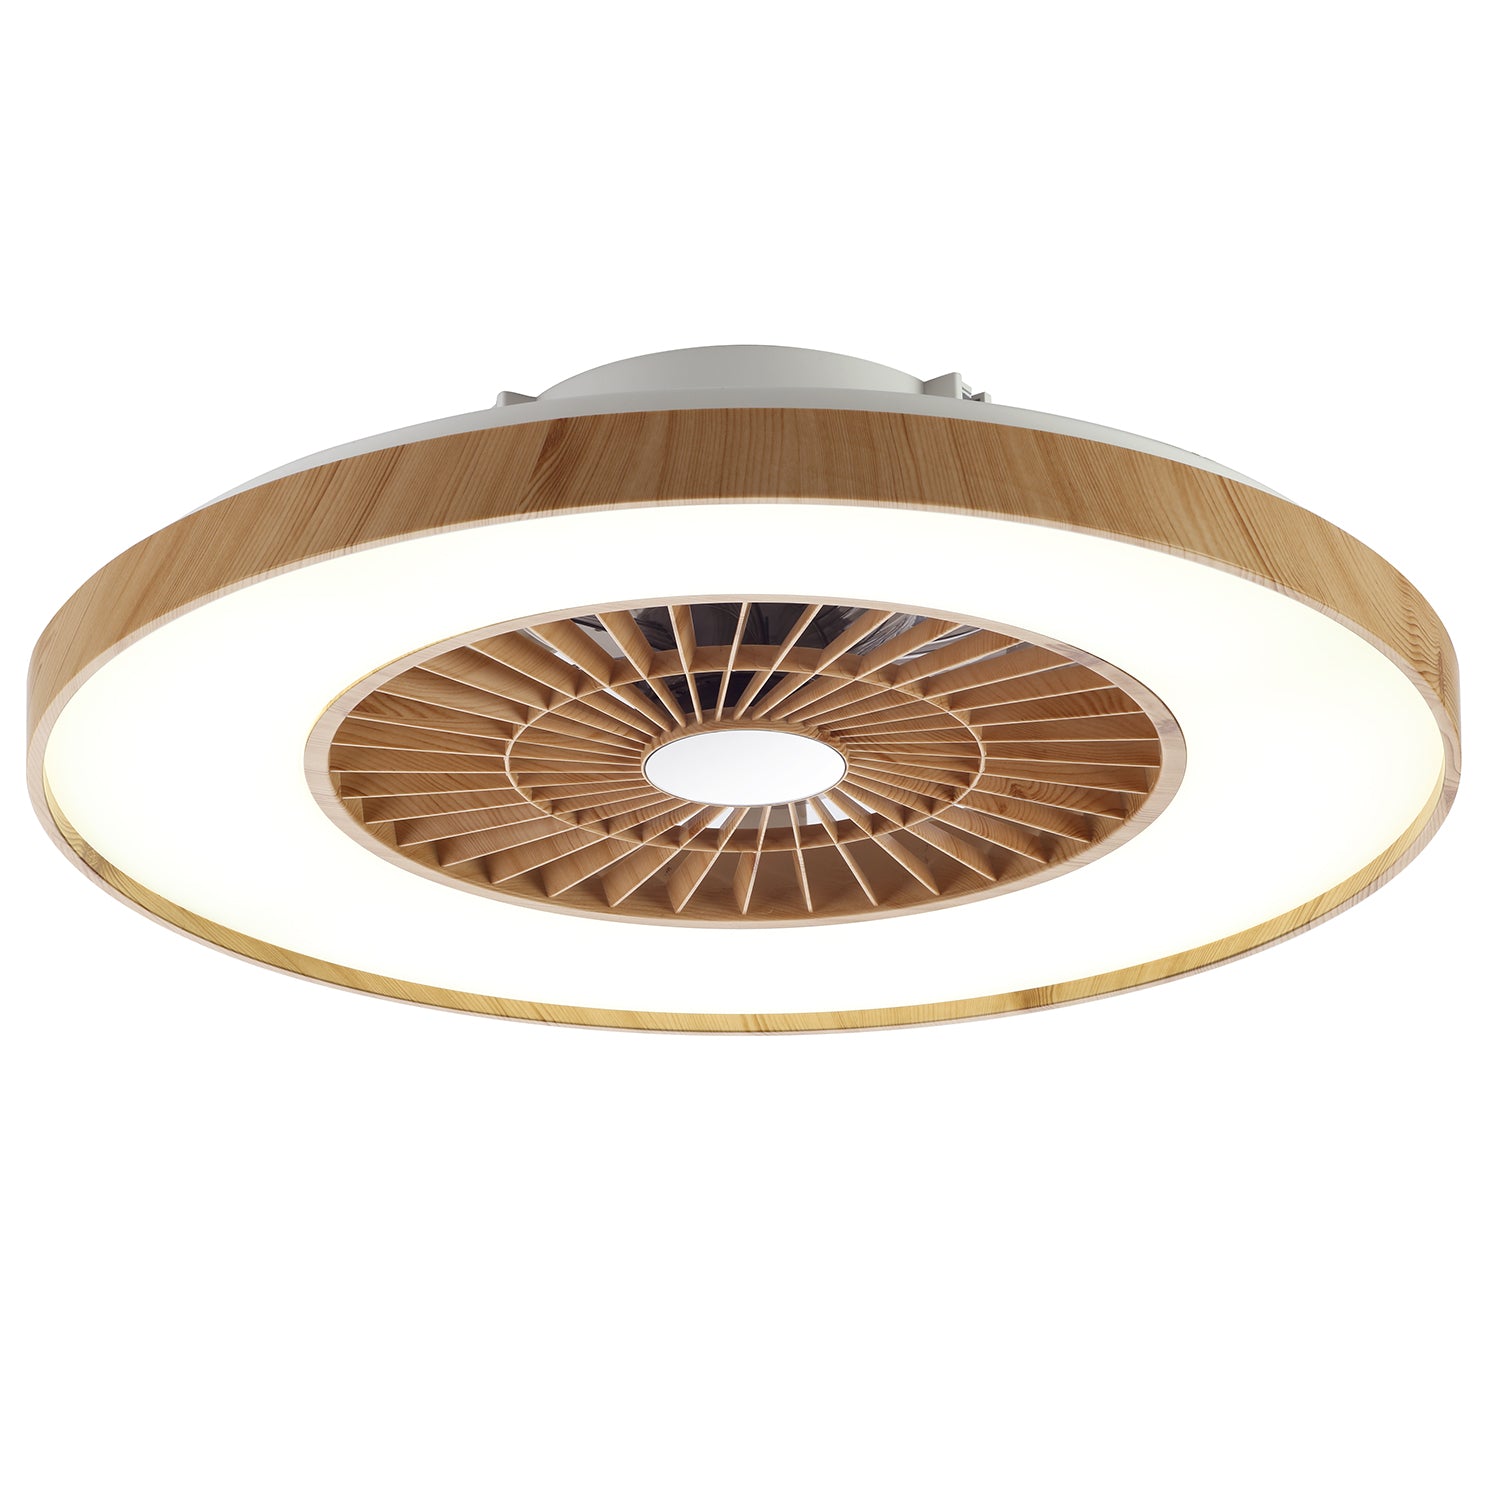 Tuya Smart Control Ceiling Fan Light D:604mm with Wooden Effect Frame